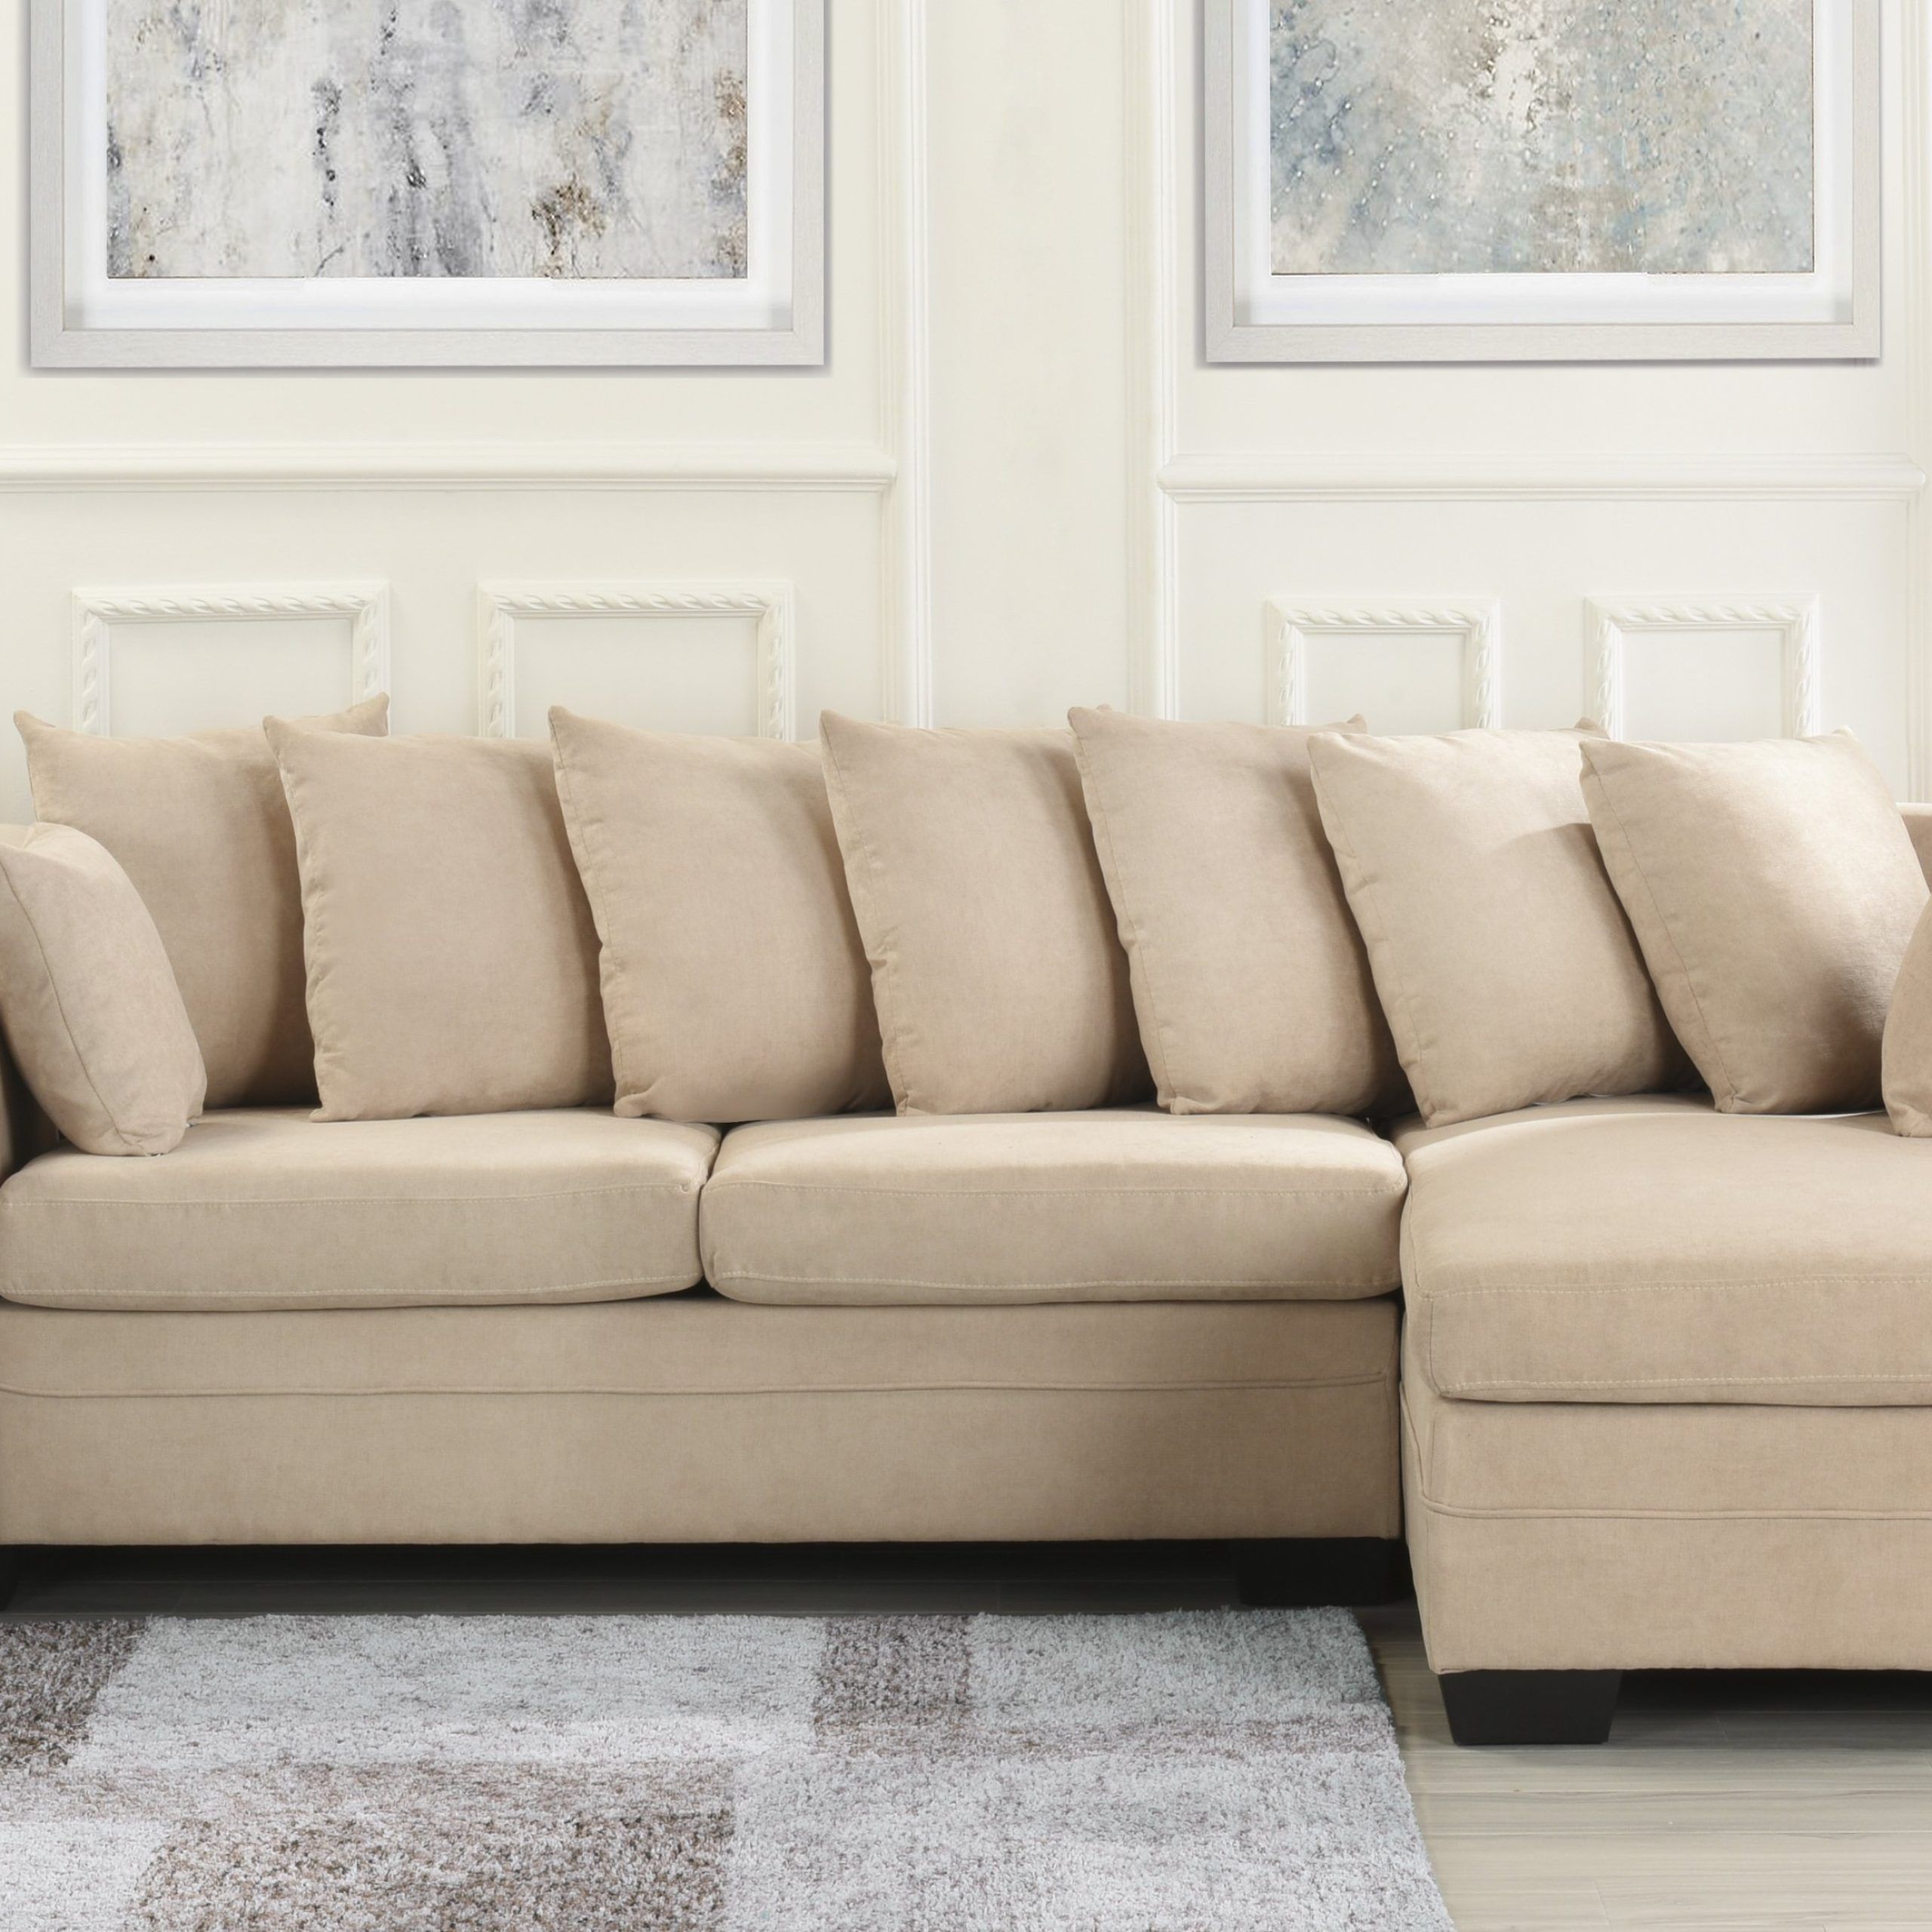 Large Brush Microfiber Sectional Sofa, L Shape Couch Extra Wide Chaise Pertaining To Small L Shaped Sectional Sofas In Beige (View 9 of 21)